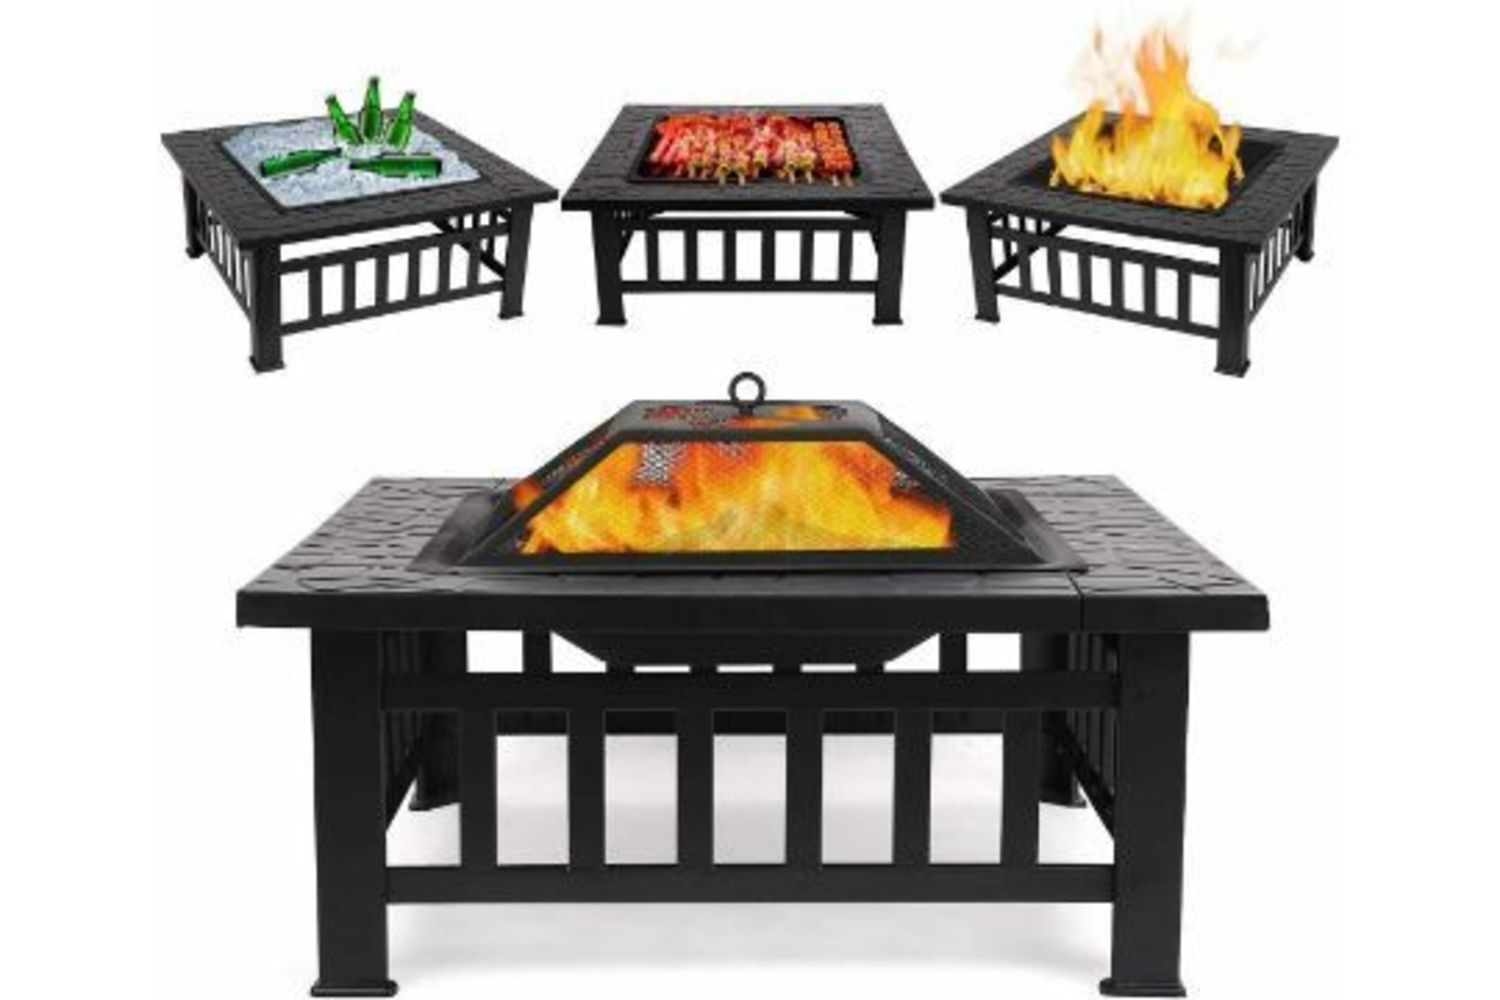 Outdoor Liquidation Sale - Rattan Sofas, 3 in 1 Firepits, Portable Firepits, BBQs, Patio Heaters, Wall Heaters & More - Delivery Available!